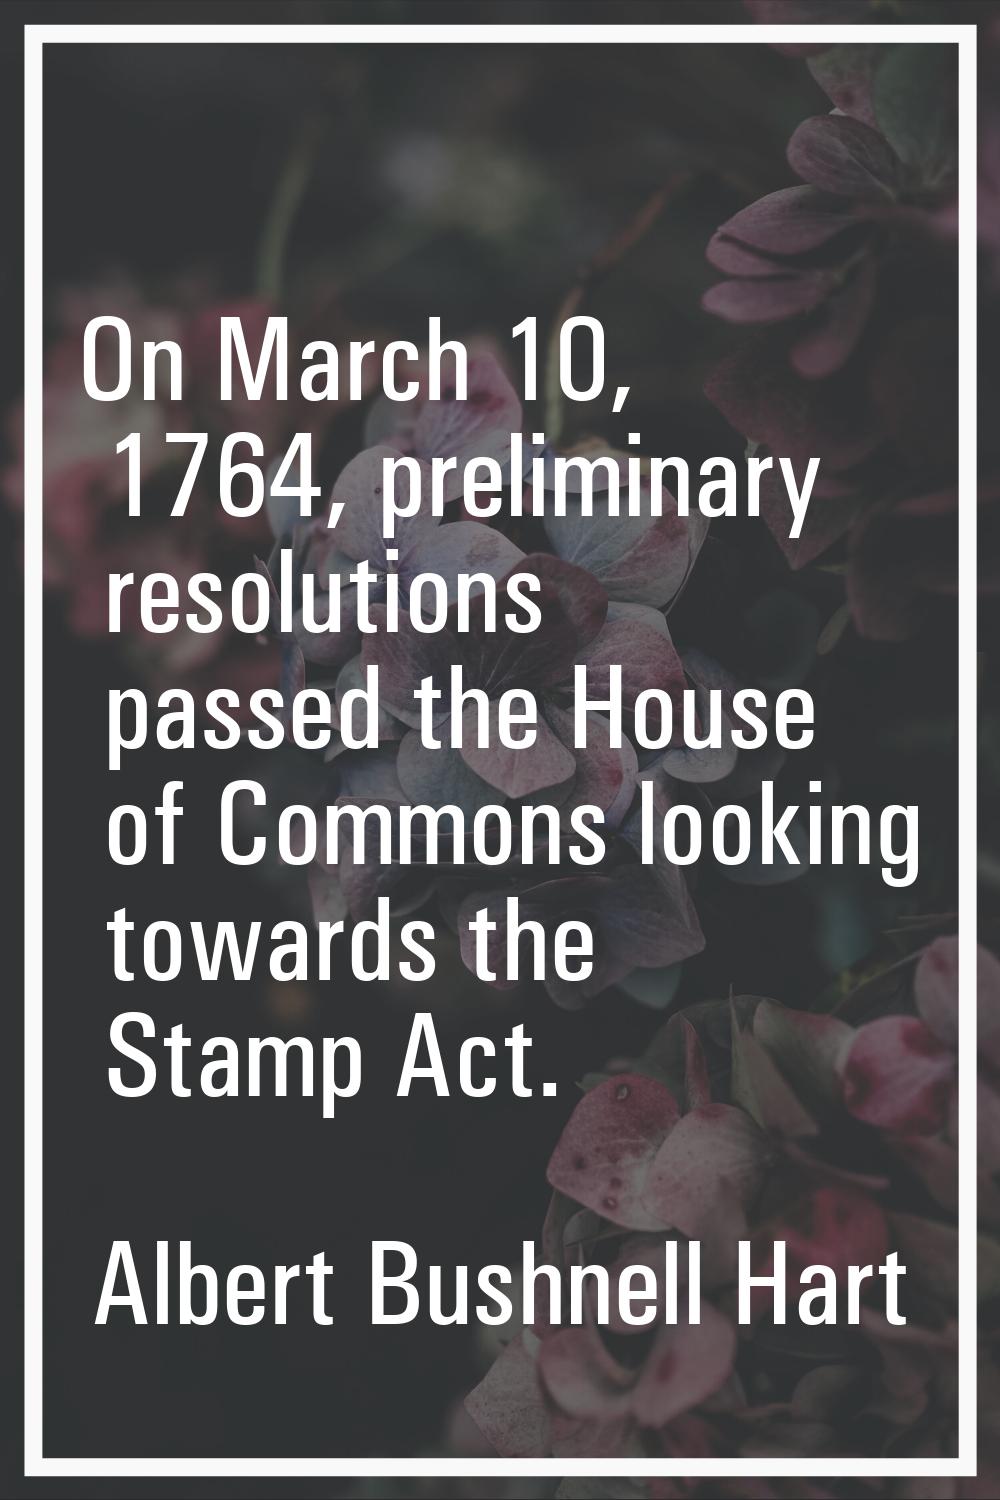 On March 10, 1764, preliminary resolutions passed the House of Commons looking towards the Stamp Ac